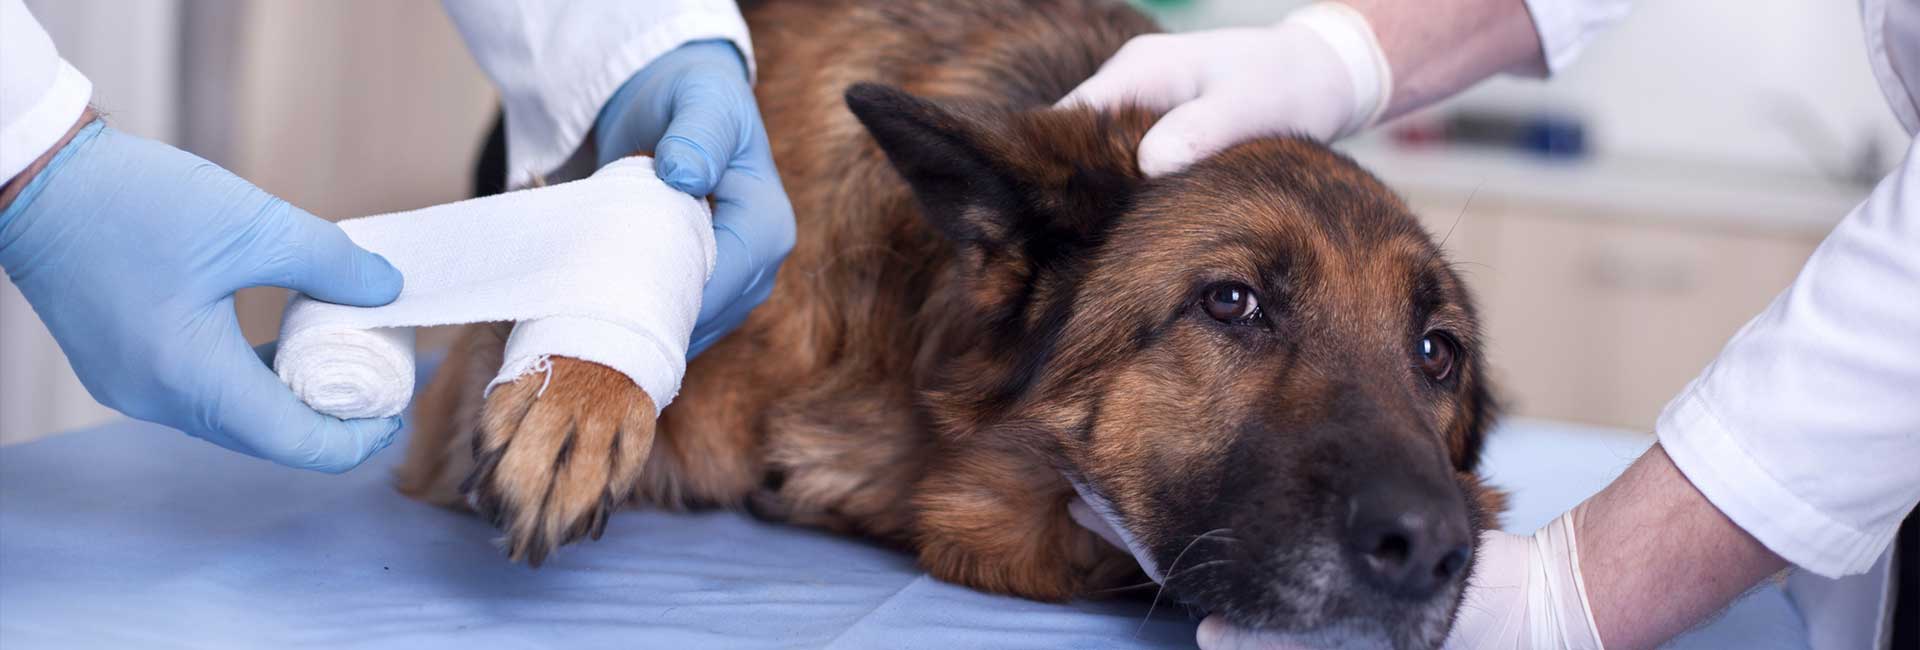 Pet dog getting emergency treatment at the veterinary hospital